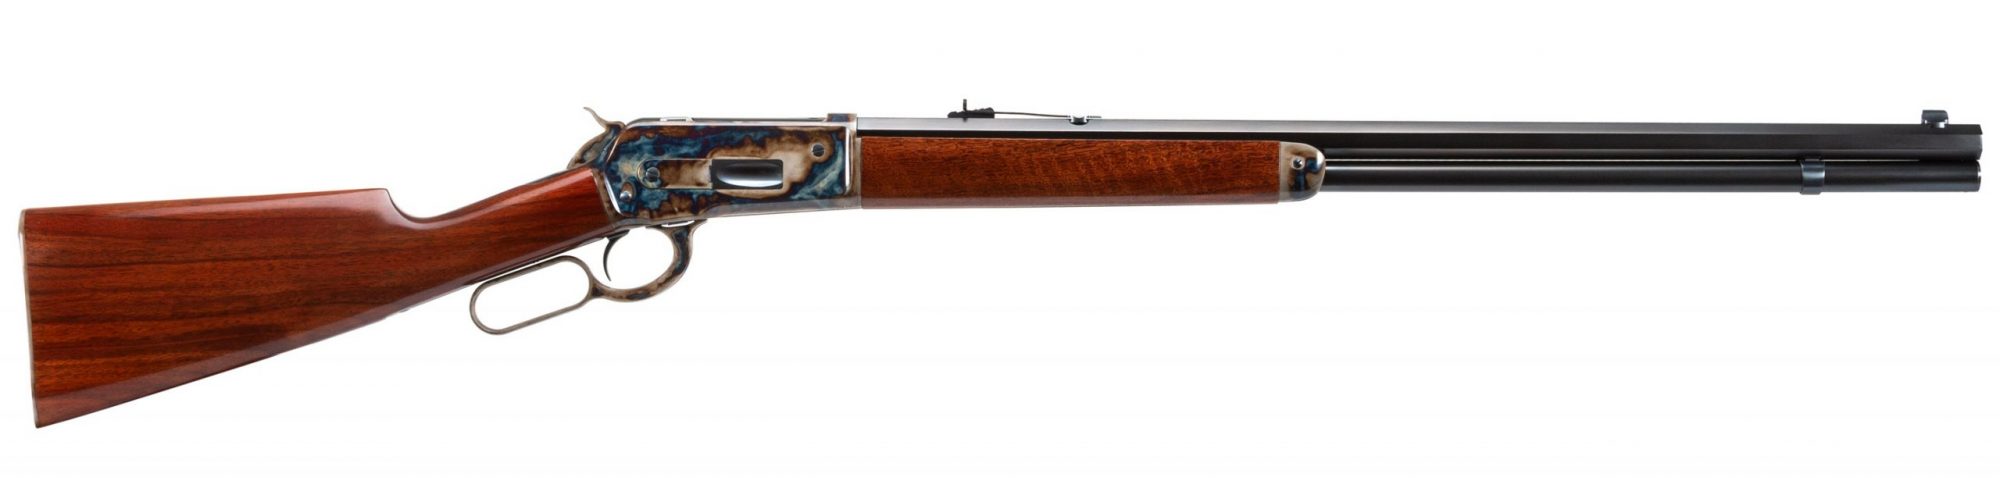 Photo of a Turnbull Model 1886 lever action rifle, featuring restoration-grade finishes like bone charcoal color case hardening, charcoal bluing and rust bluing